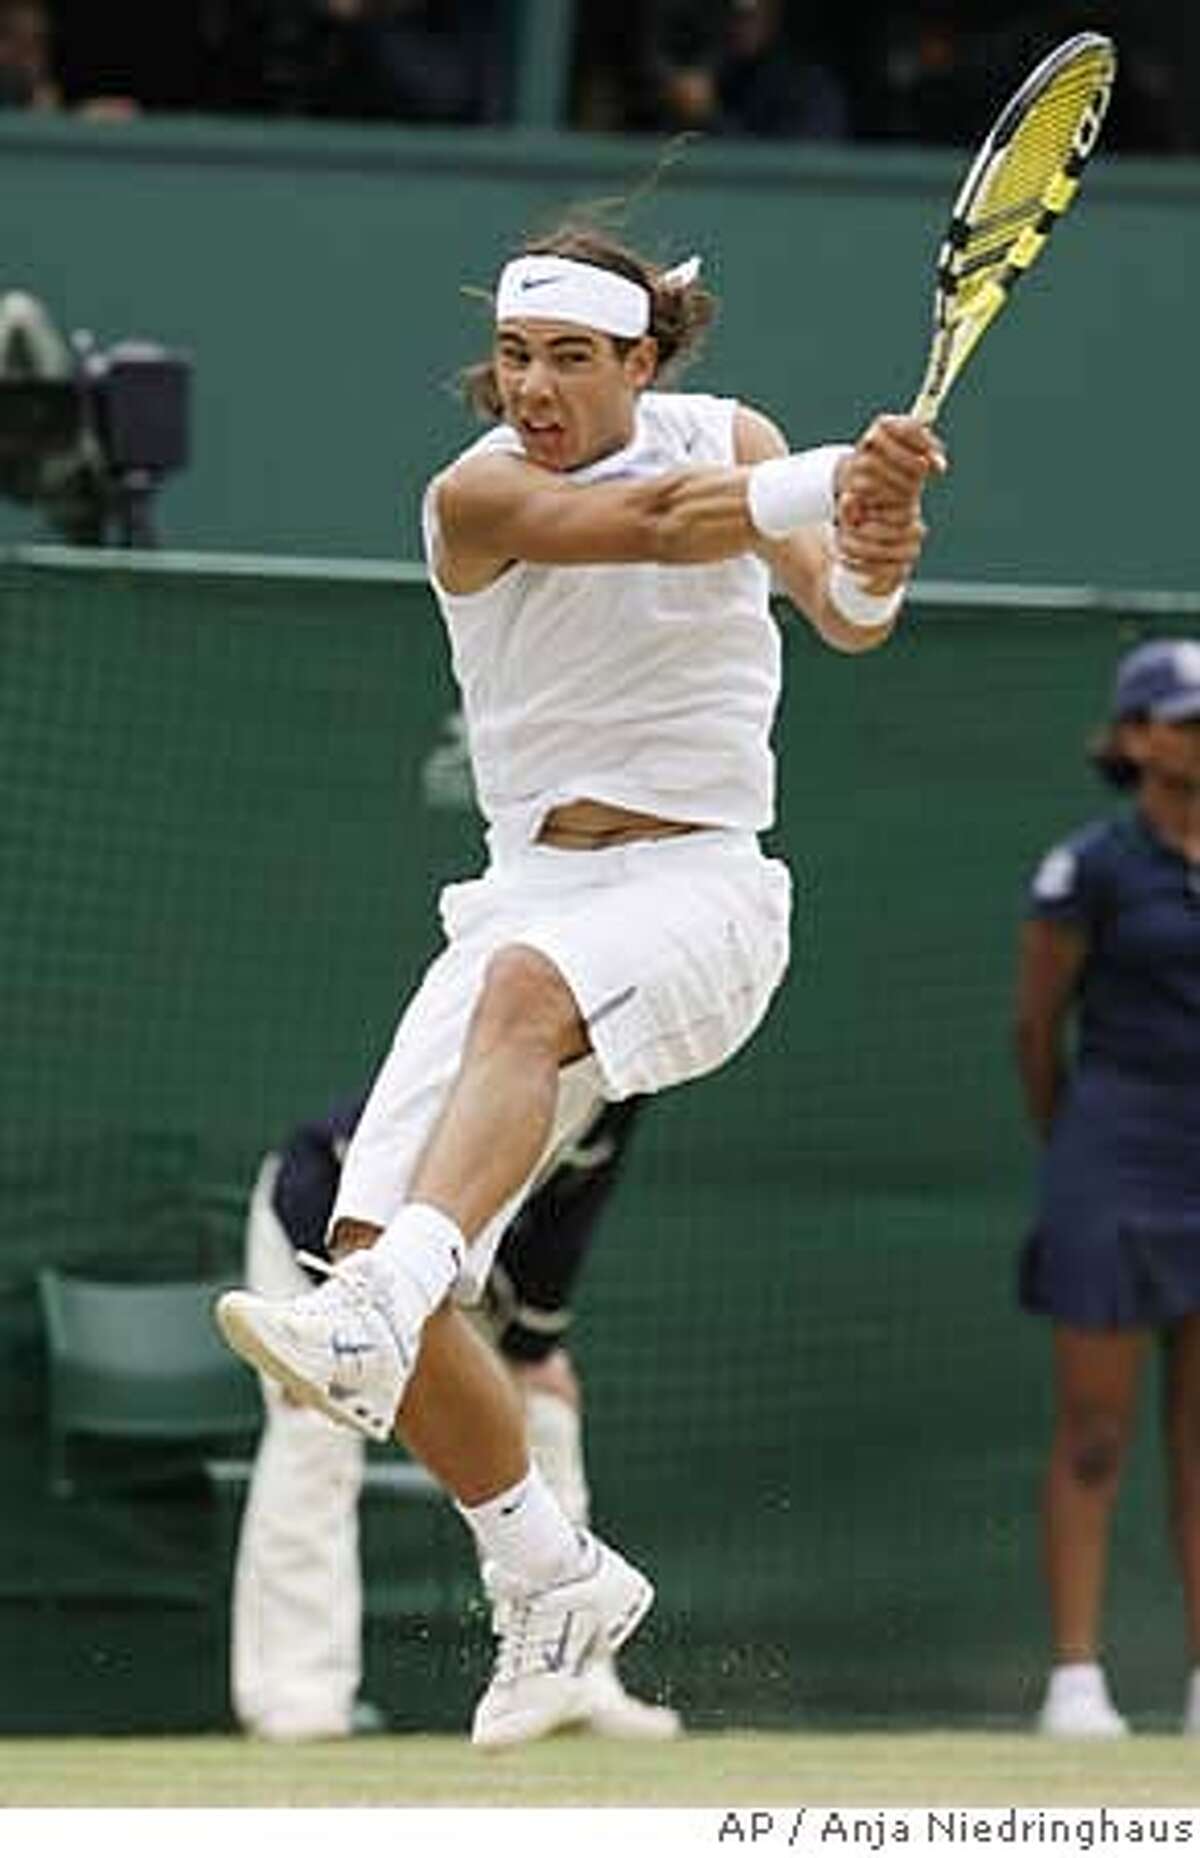 Spain's Rafael Nadal returns to Tomas Berdych of the Czech Republic, during their Men's Singles quarter final on the Centre Court at Wimbledon, Friday July 6, 2007. (AP Photo/Anja Niedringhaus) ** EDITORIAL USE ONLY ** EDITORIAL USE ONLY